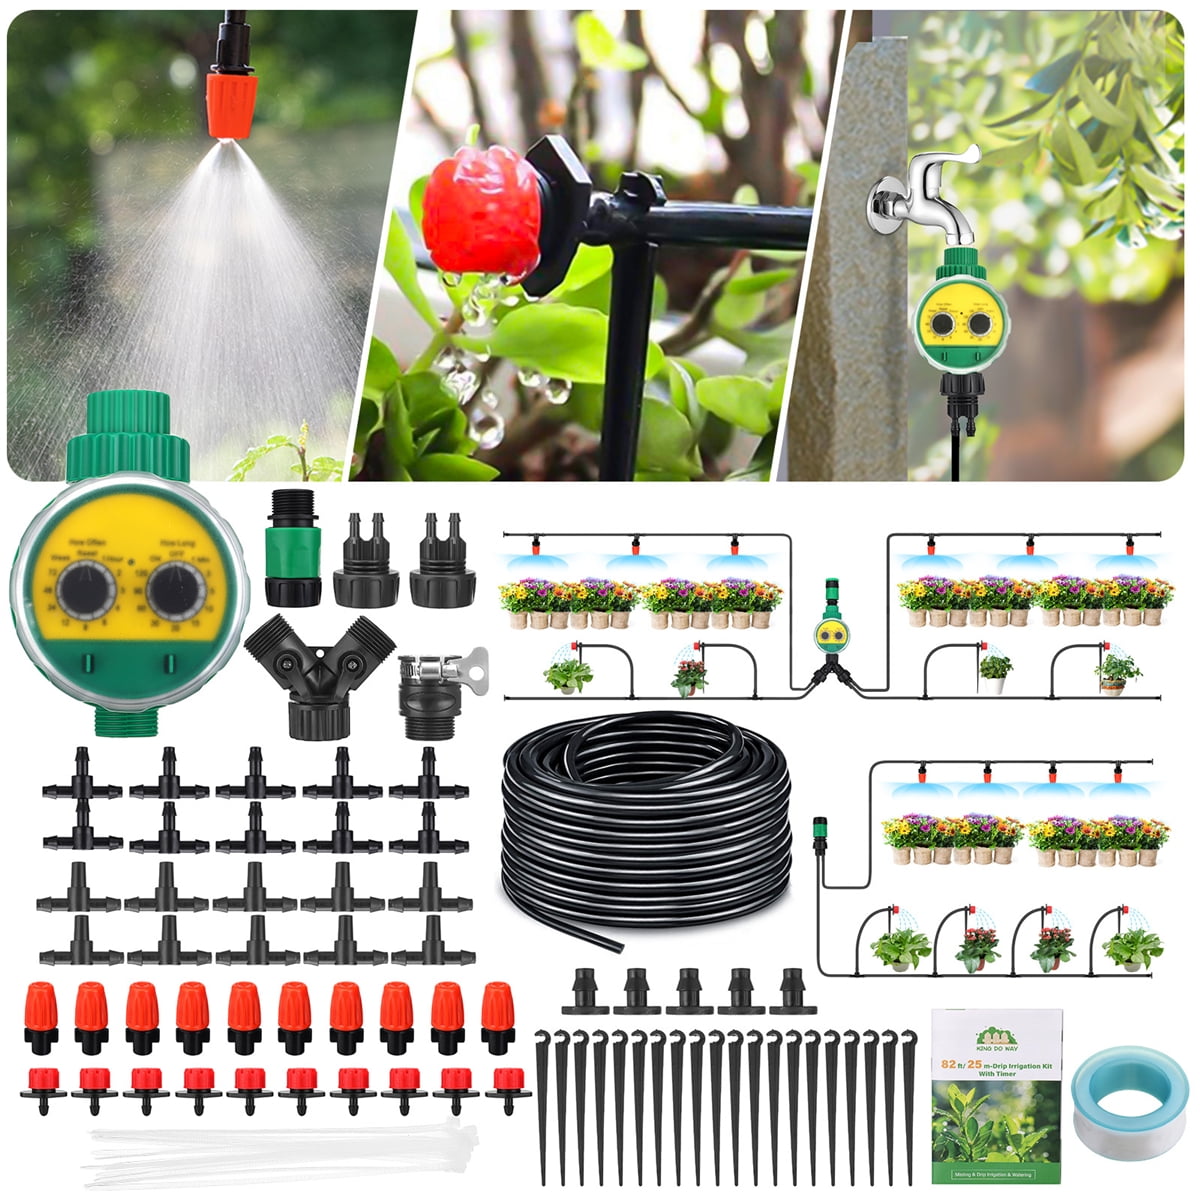 Details about   DIY Garden Automatic Micro Drip Irrigation System Kit Timer Sprinkler Watering 